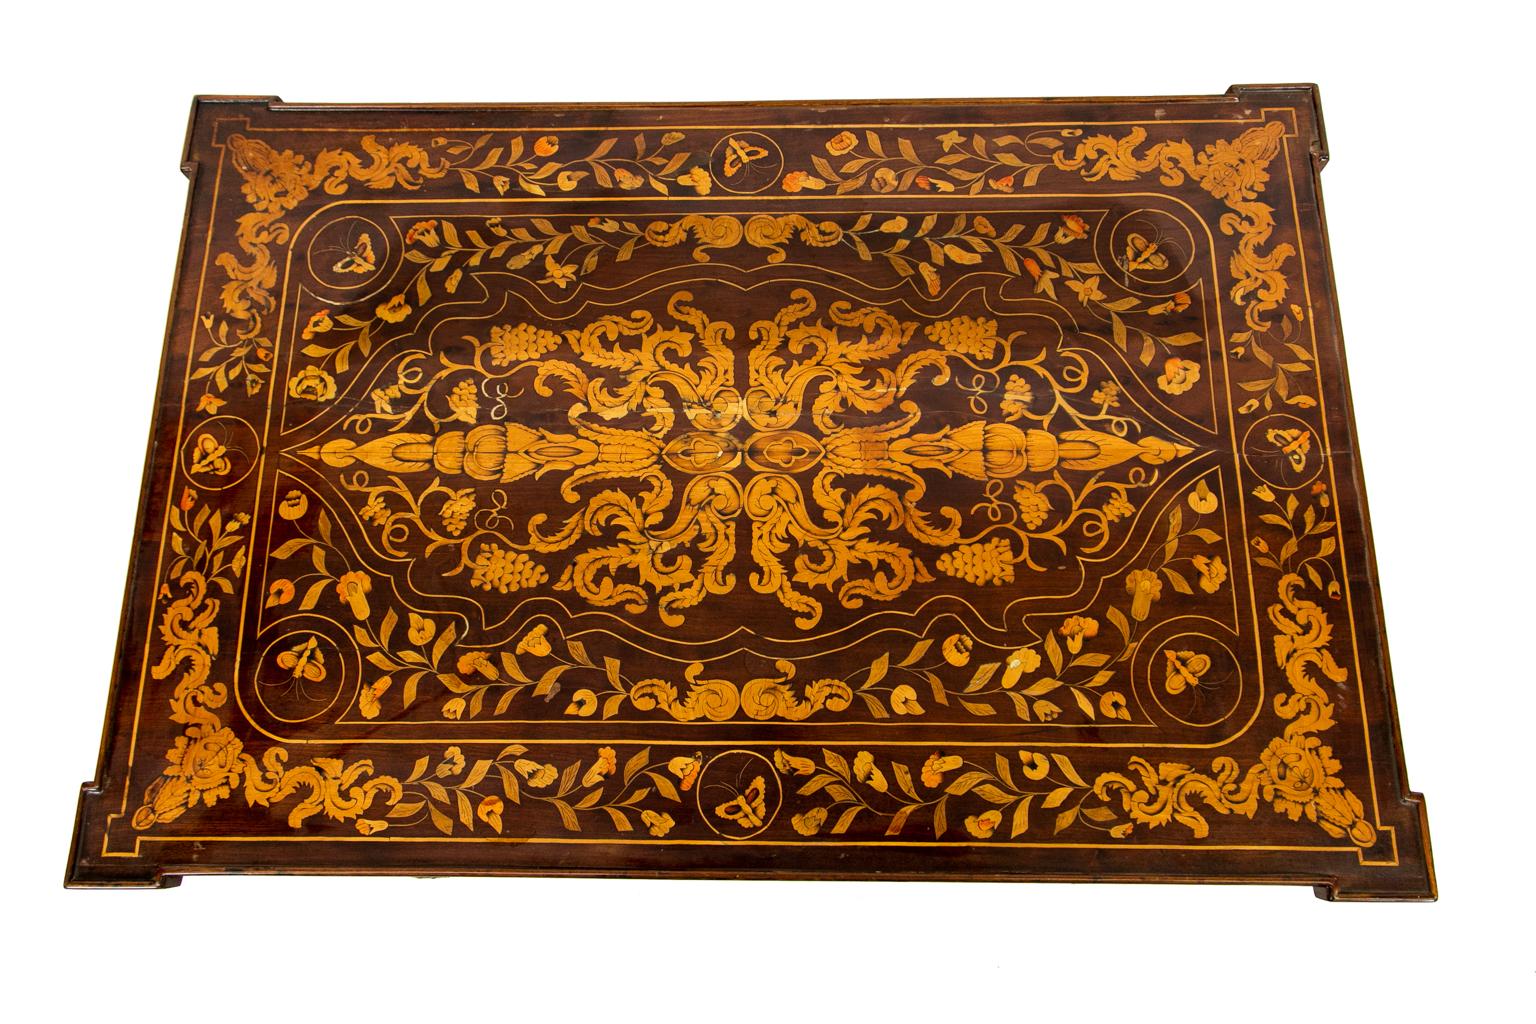 Early 19th Century Dutch Marquetry Center Table, the top inlaid with flowers, leaves, and butterflies with book matched masks on the corners. It is fully inlaid on all four sides. The inlaid tapered legs terminate in brass castors.
        